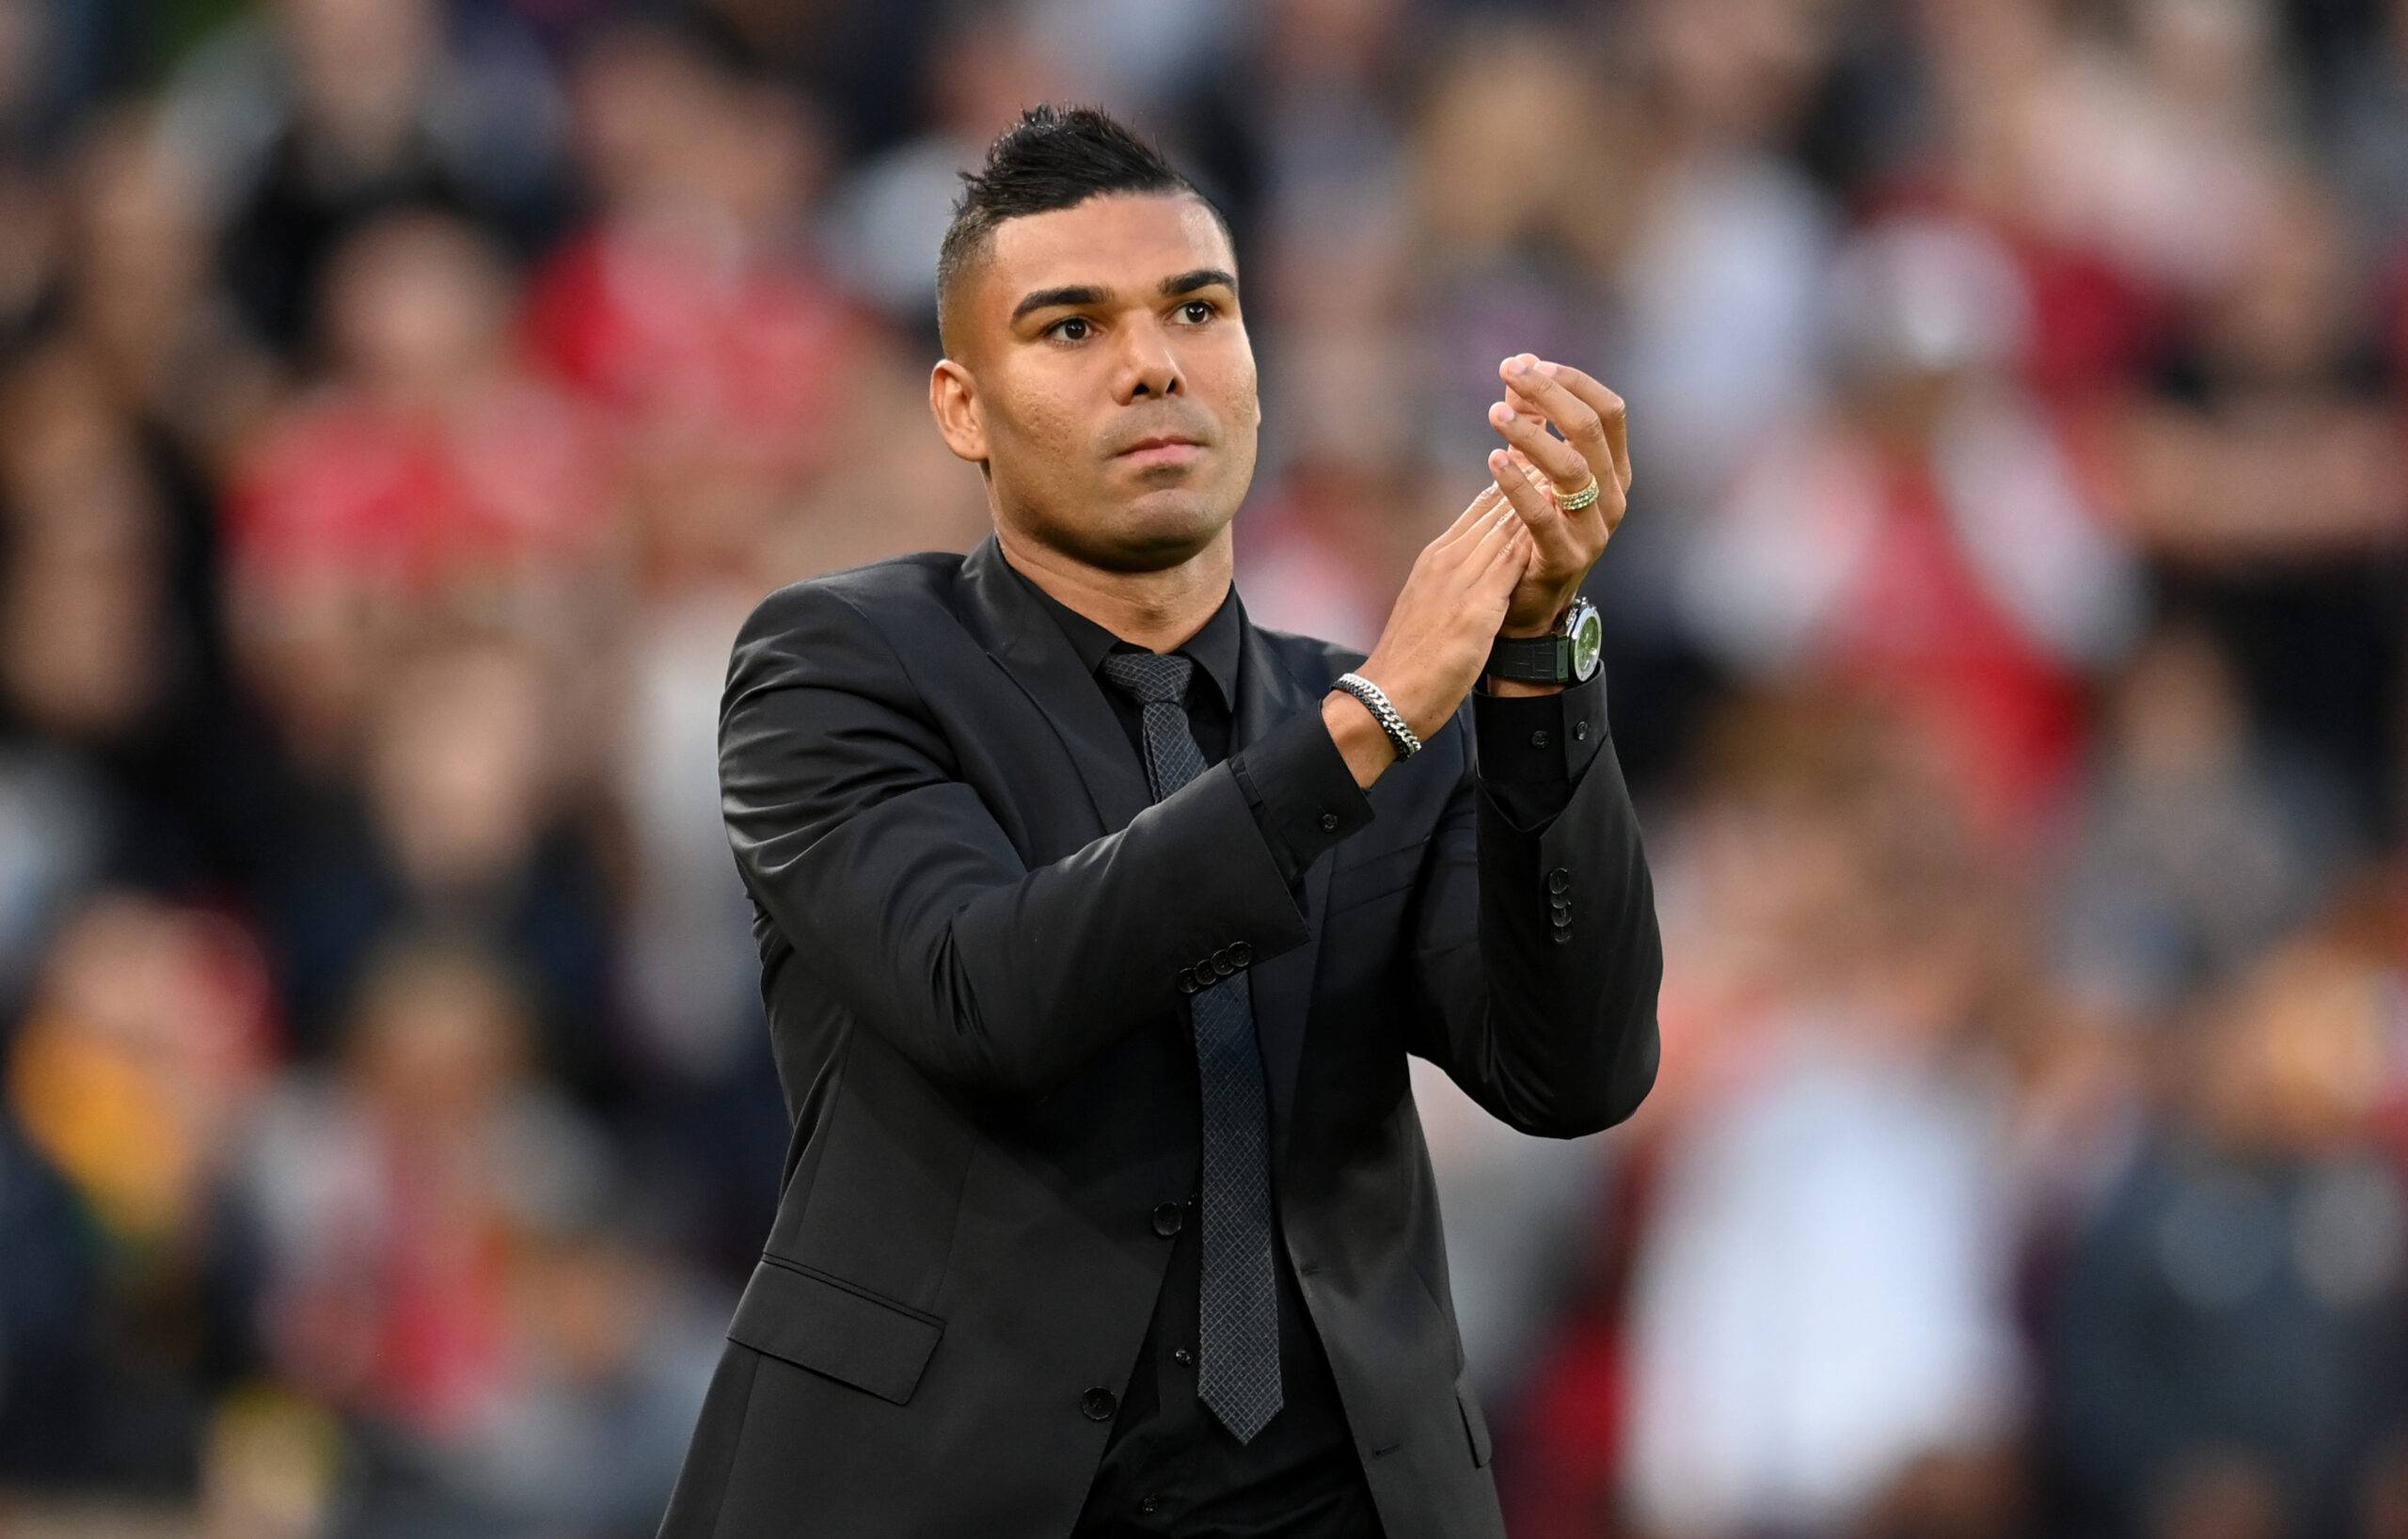 Casemiro is presented at Old Trafford